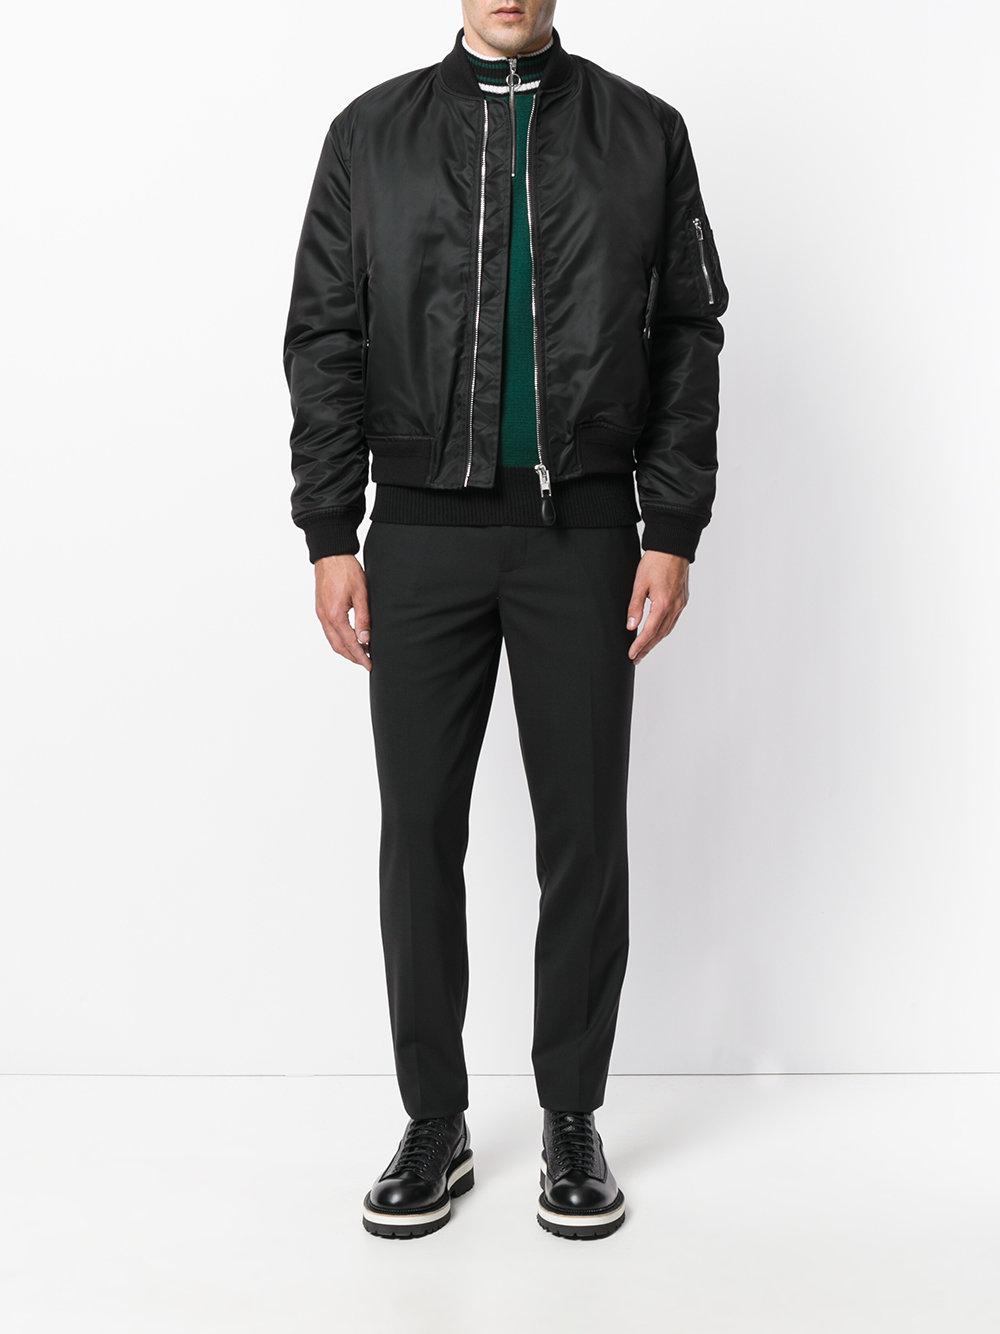 Givenchy Wool Illuminati Patch Bomber Jacket in Black for Men - Lyst